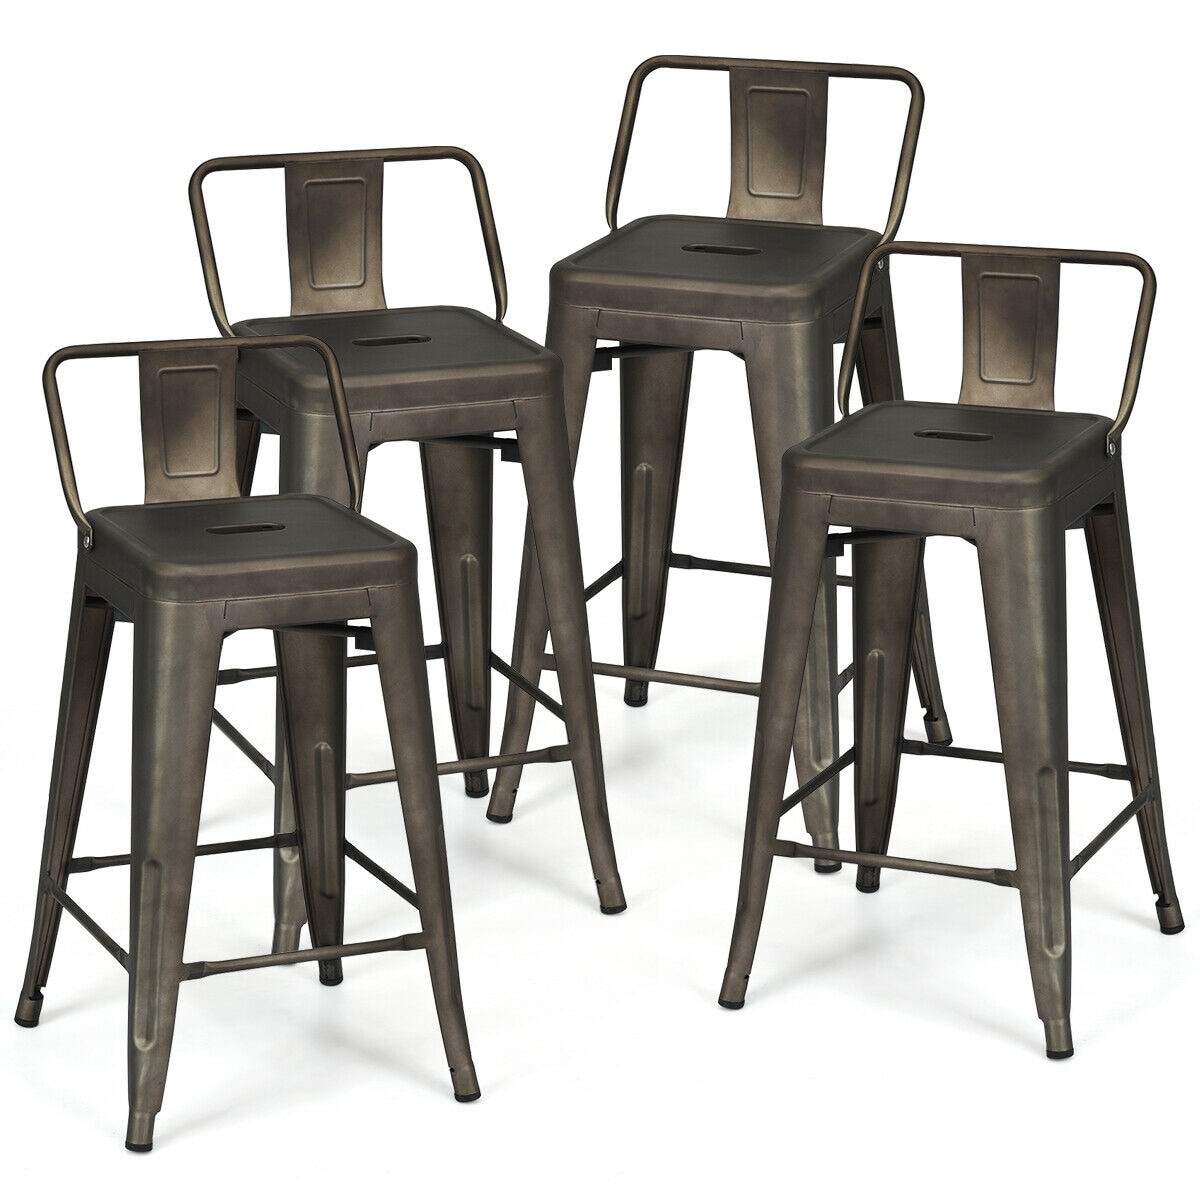 4× Swivel Plastic Bar Stools with Arm Dinning Chairs Counter Height Metal Legs 